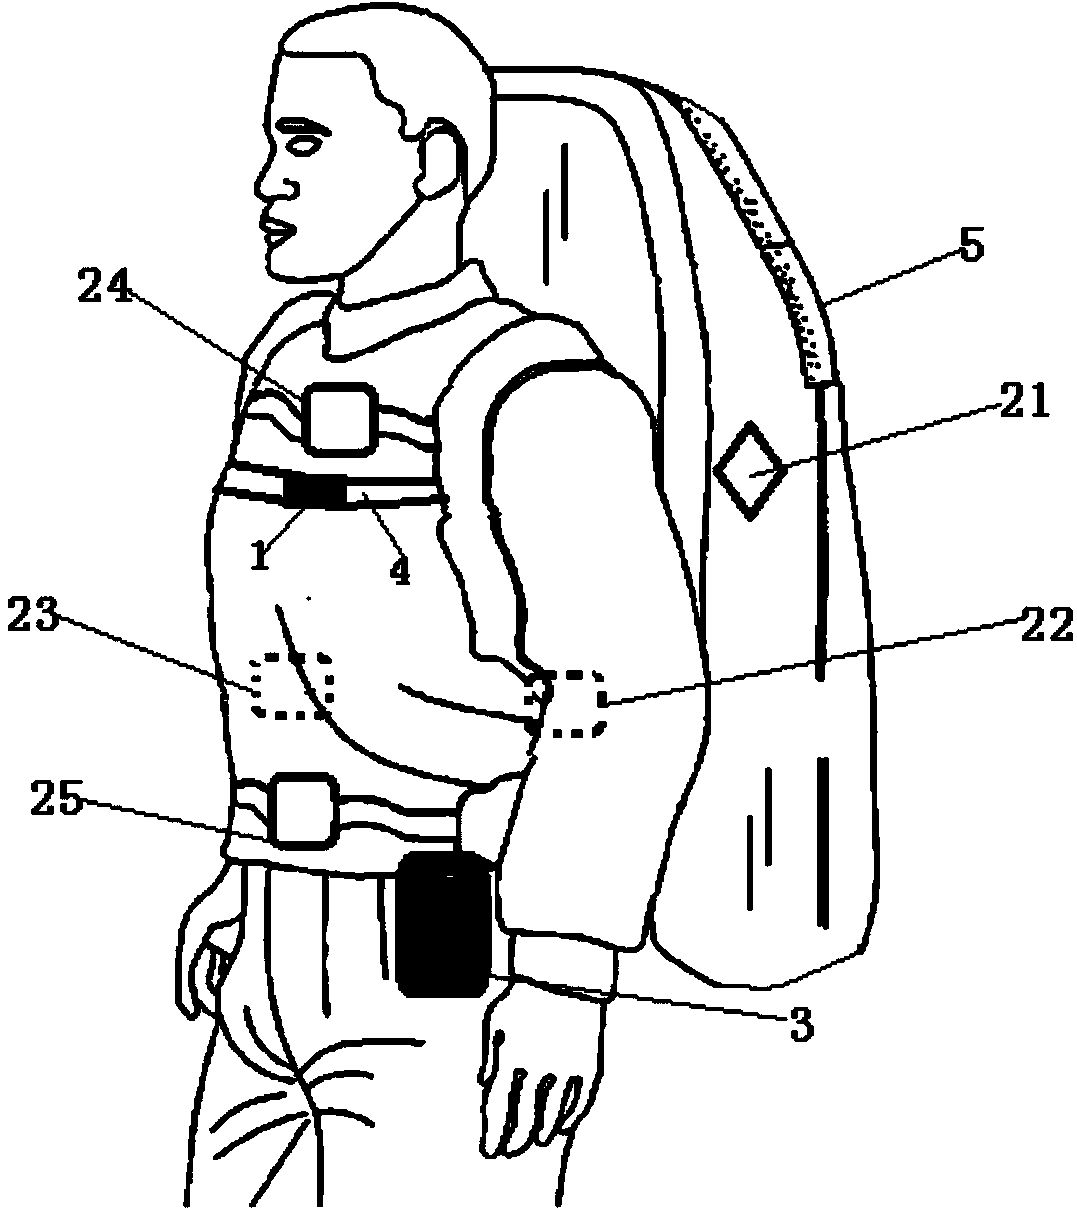 Portable human body load physiological and biomechanical monitoring device